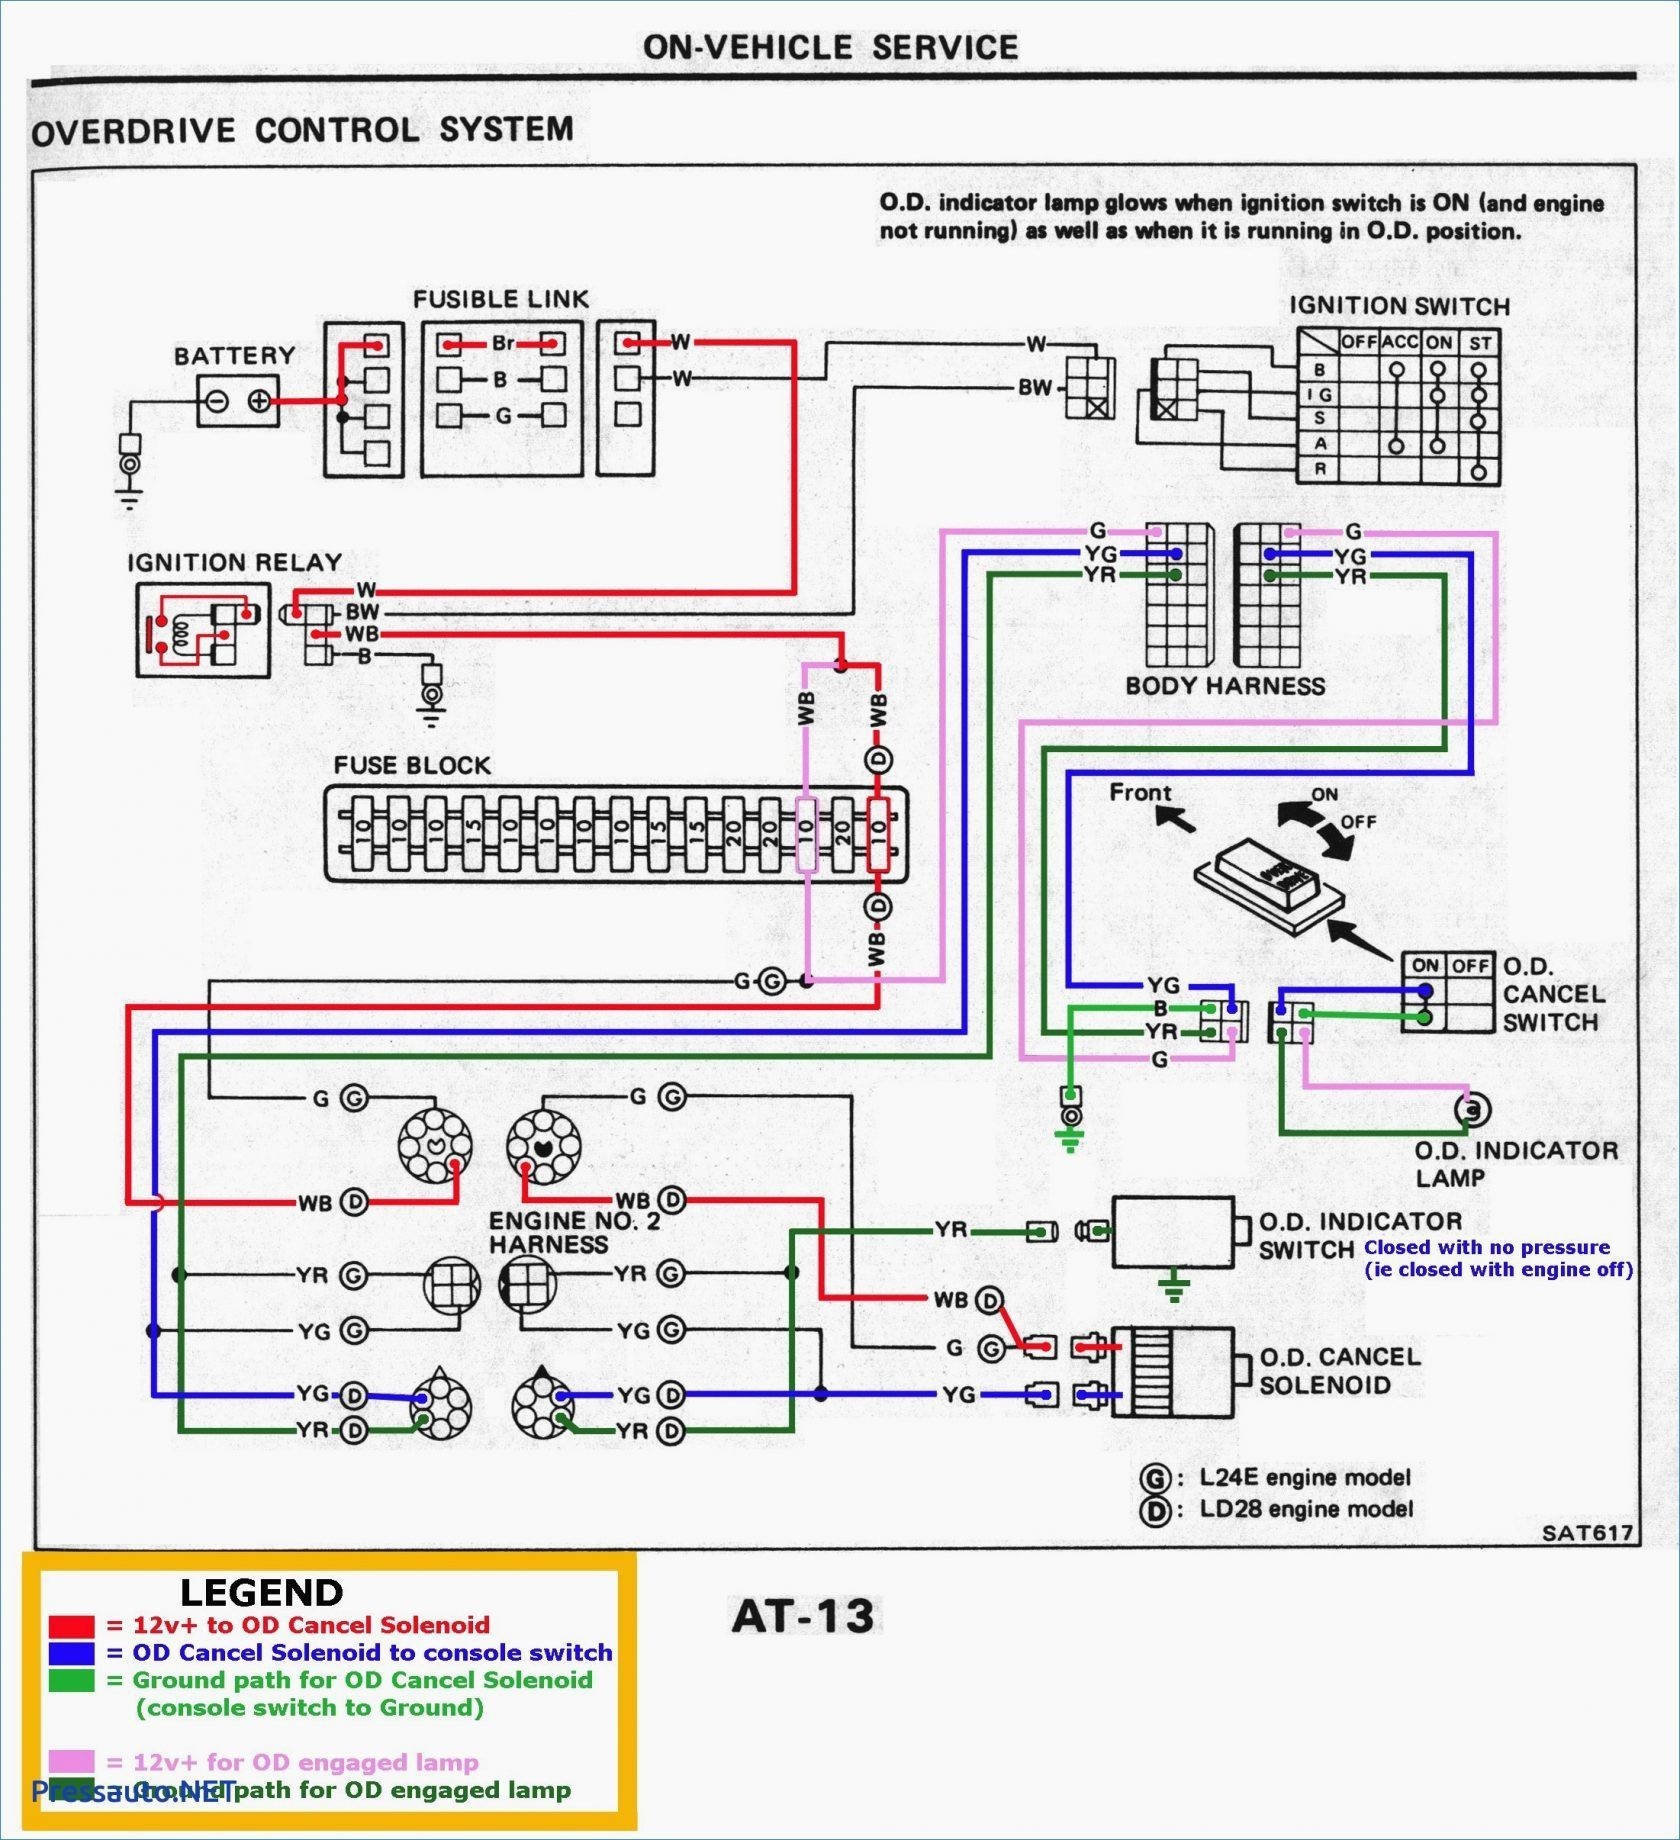 Car Air Conditioning System Diagram Ac Wire Diagram 8335b671 Of Car Air Conditioning System Diagram